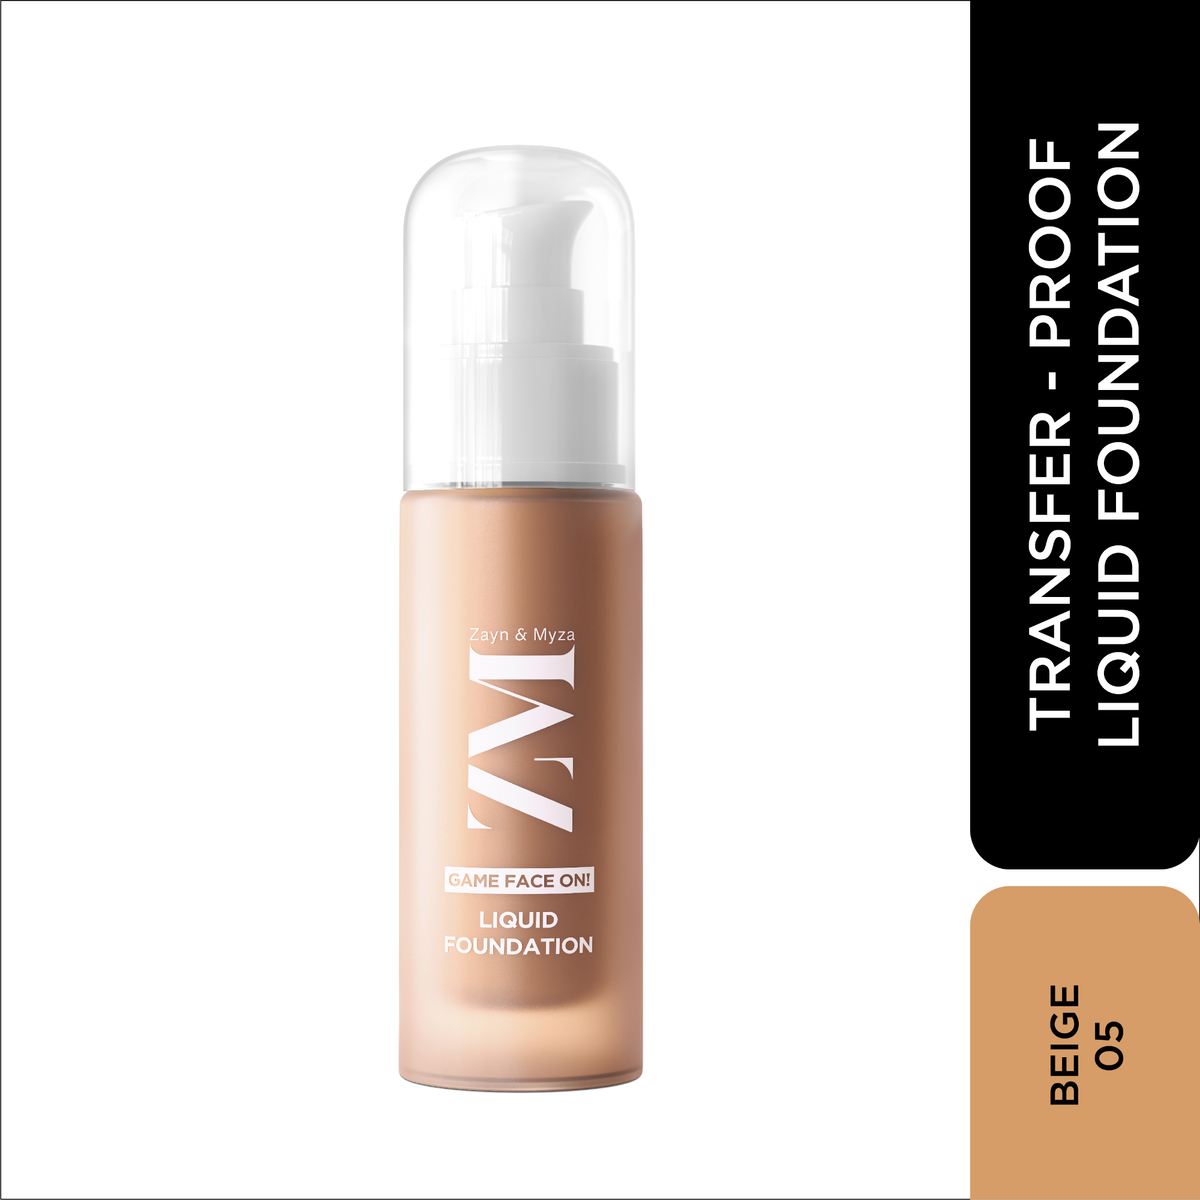 Zayn & Myza Game Face on Liquid Foundation, 12 Hour Long-Lasting, Smudge-Proof, Transfer Proof, SPF 25, Beige